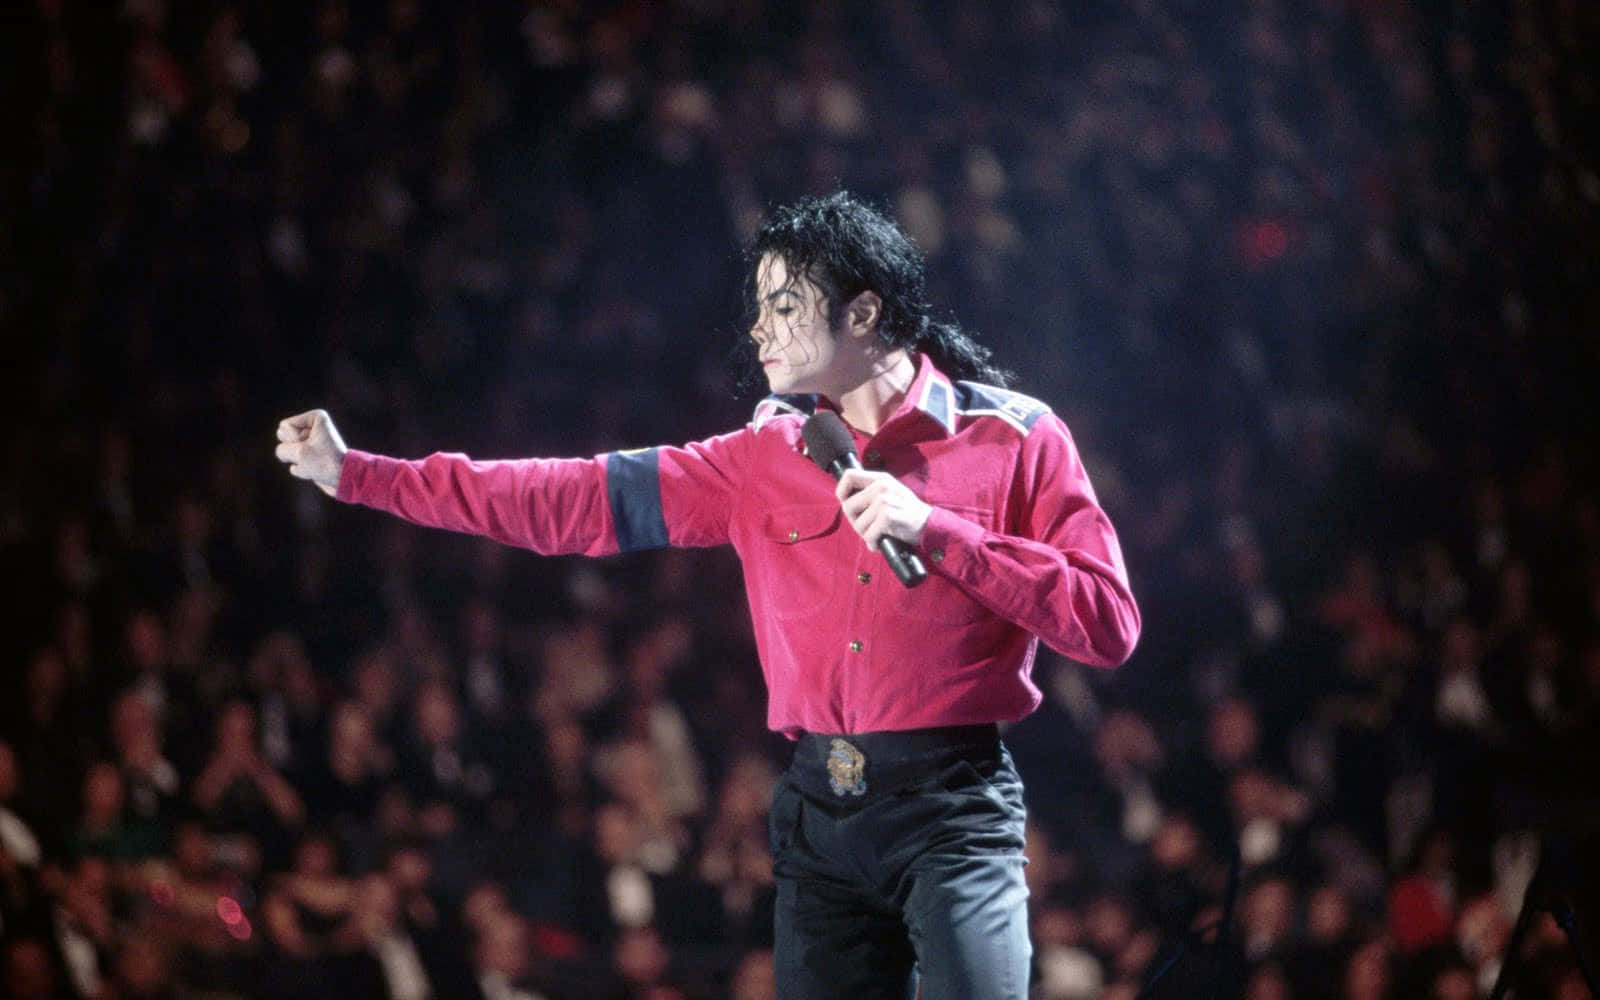 A legendary performance by Michael Jackson on stage